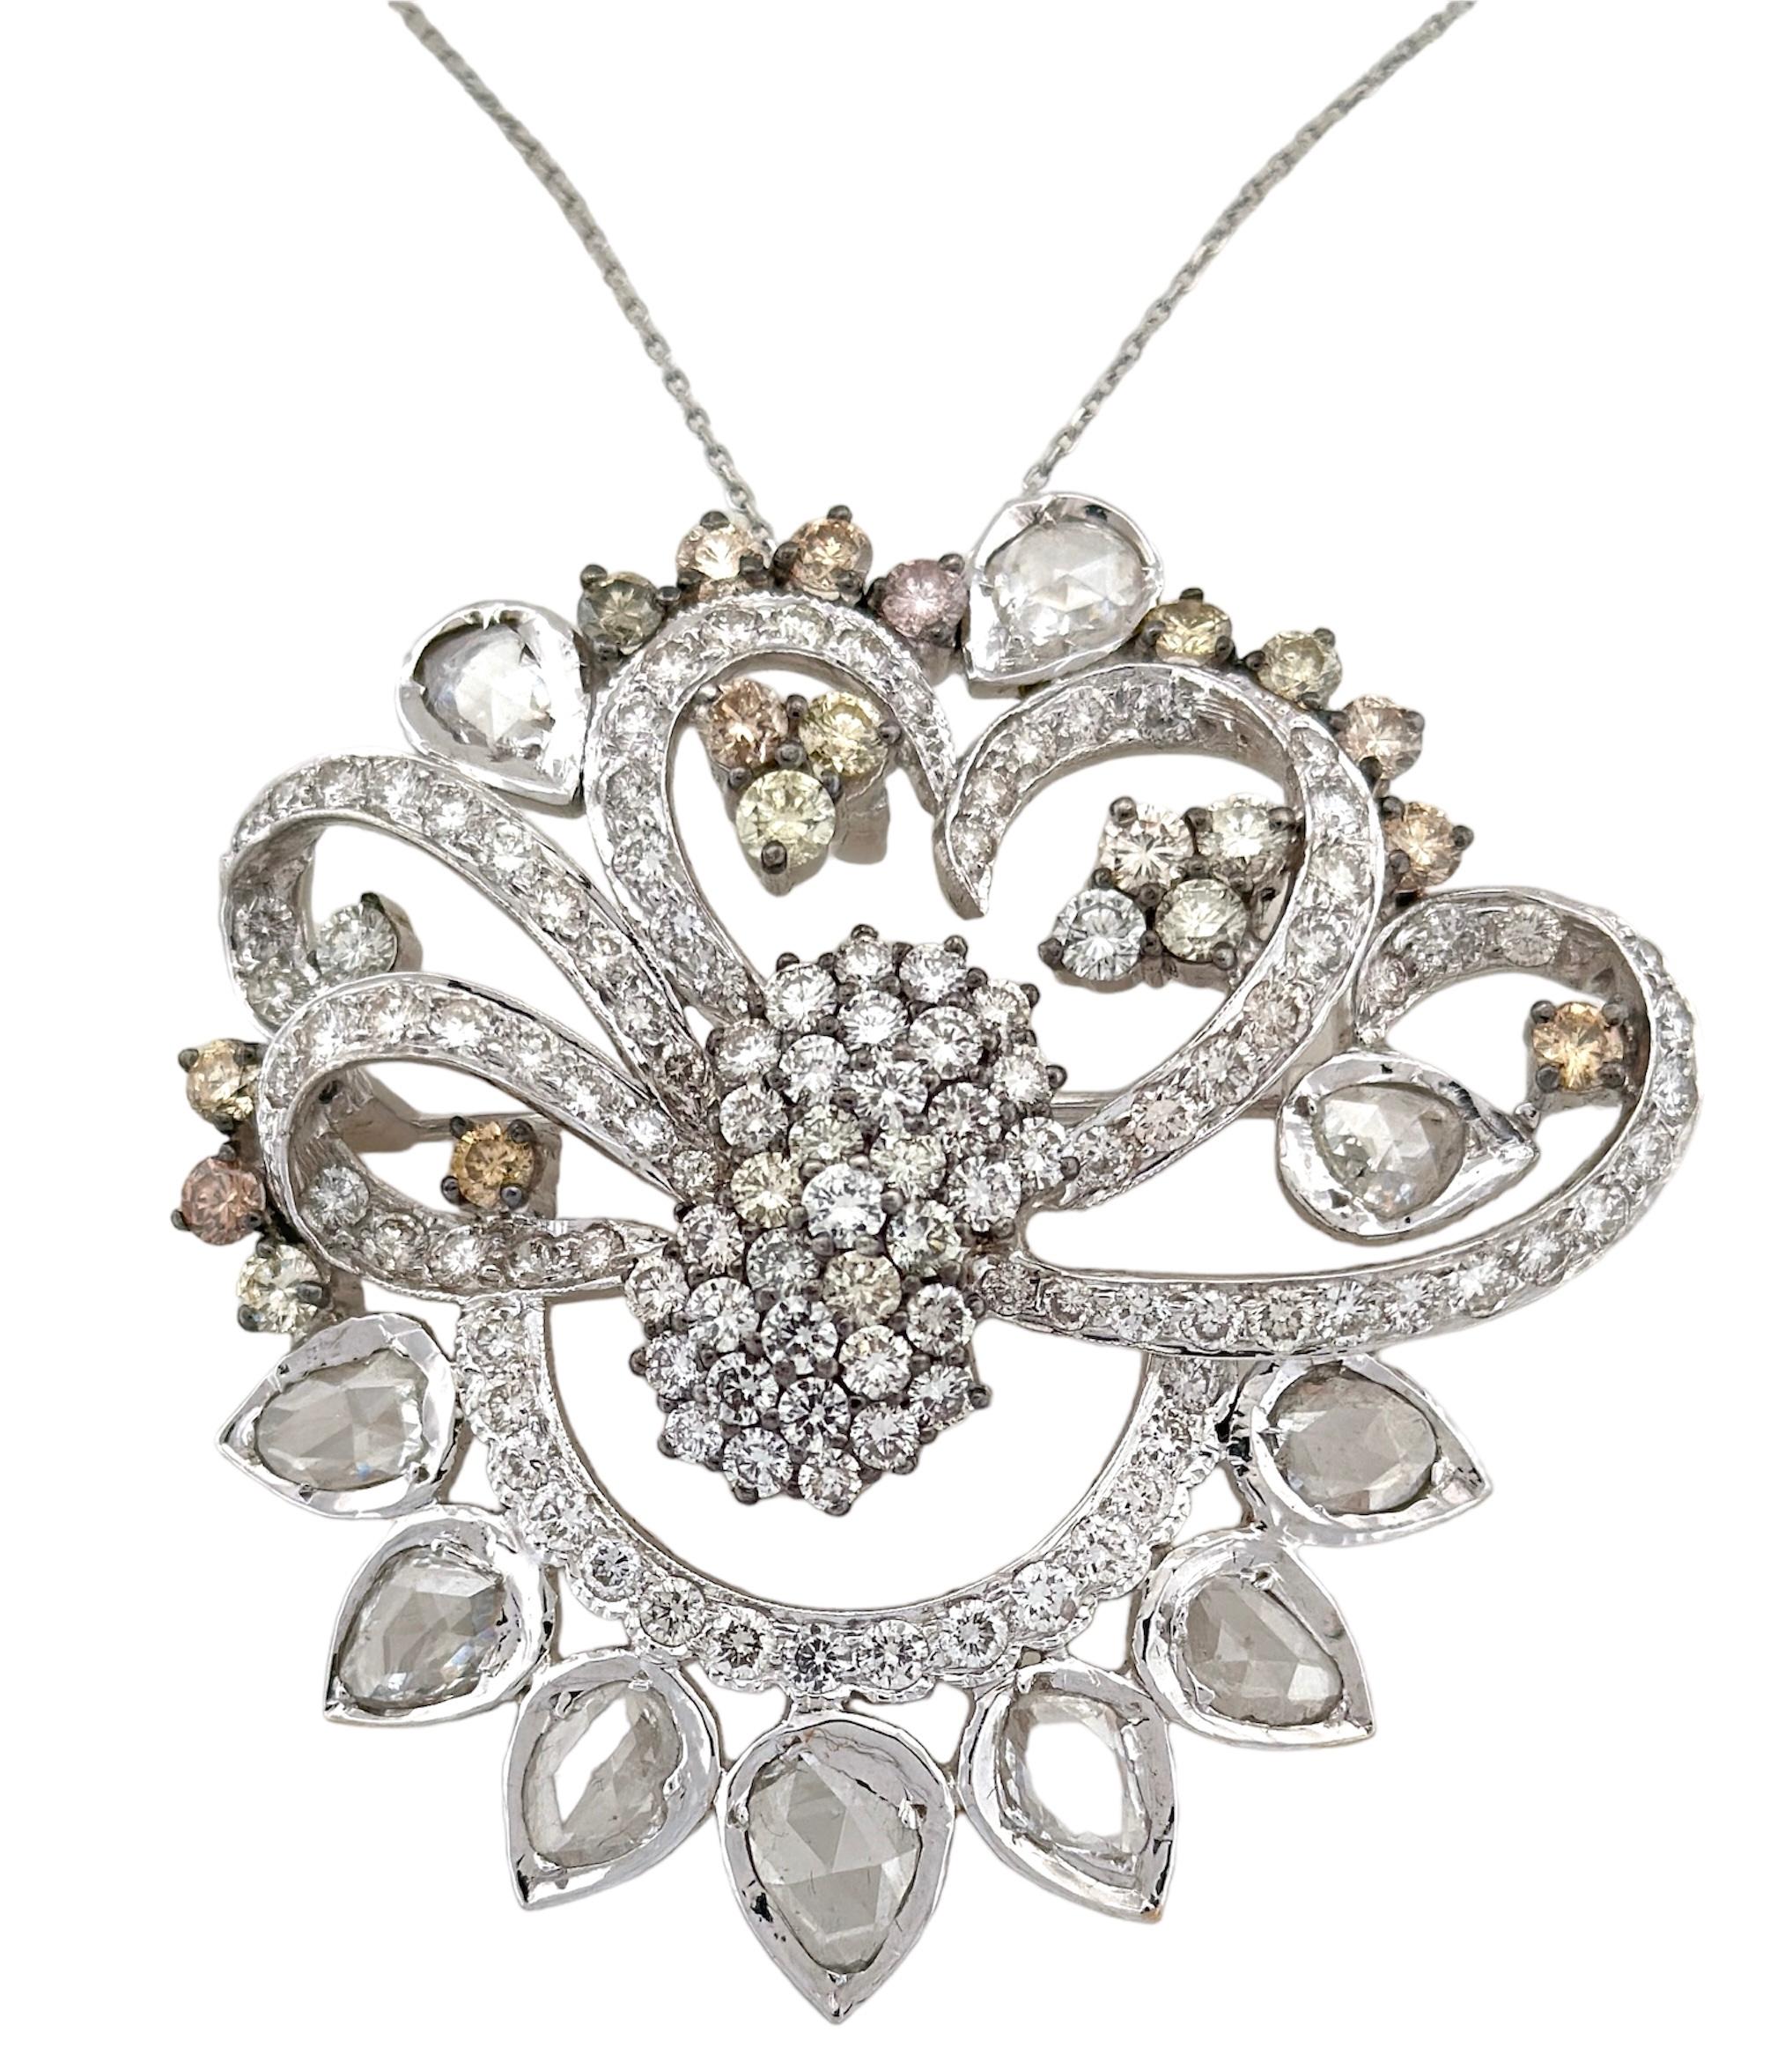 The Unique Whited Diamond Pendant And Brooch is an extraordinary piece that carries the essence of the early 20th century, a testament to the enduring beauty of vintage jewelry. With a remarkable total diamond weight of 10.95 carats and a